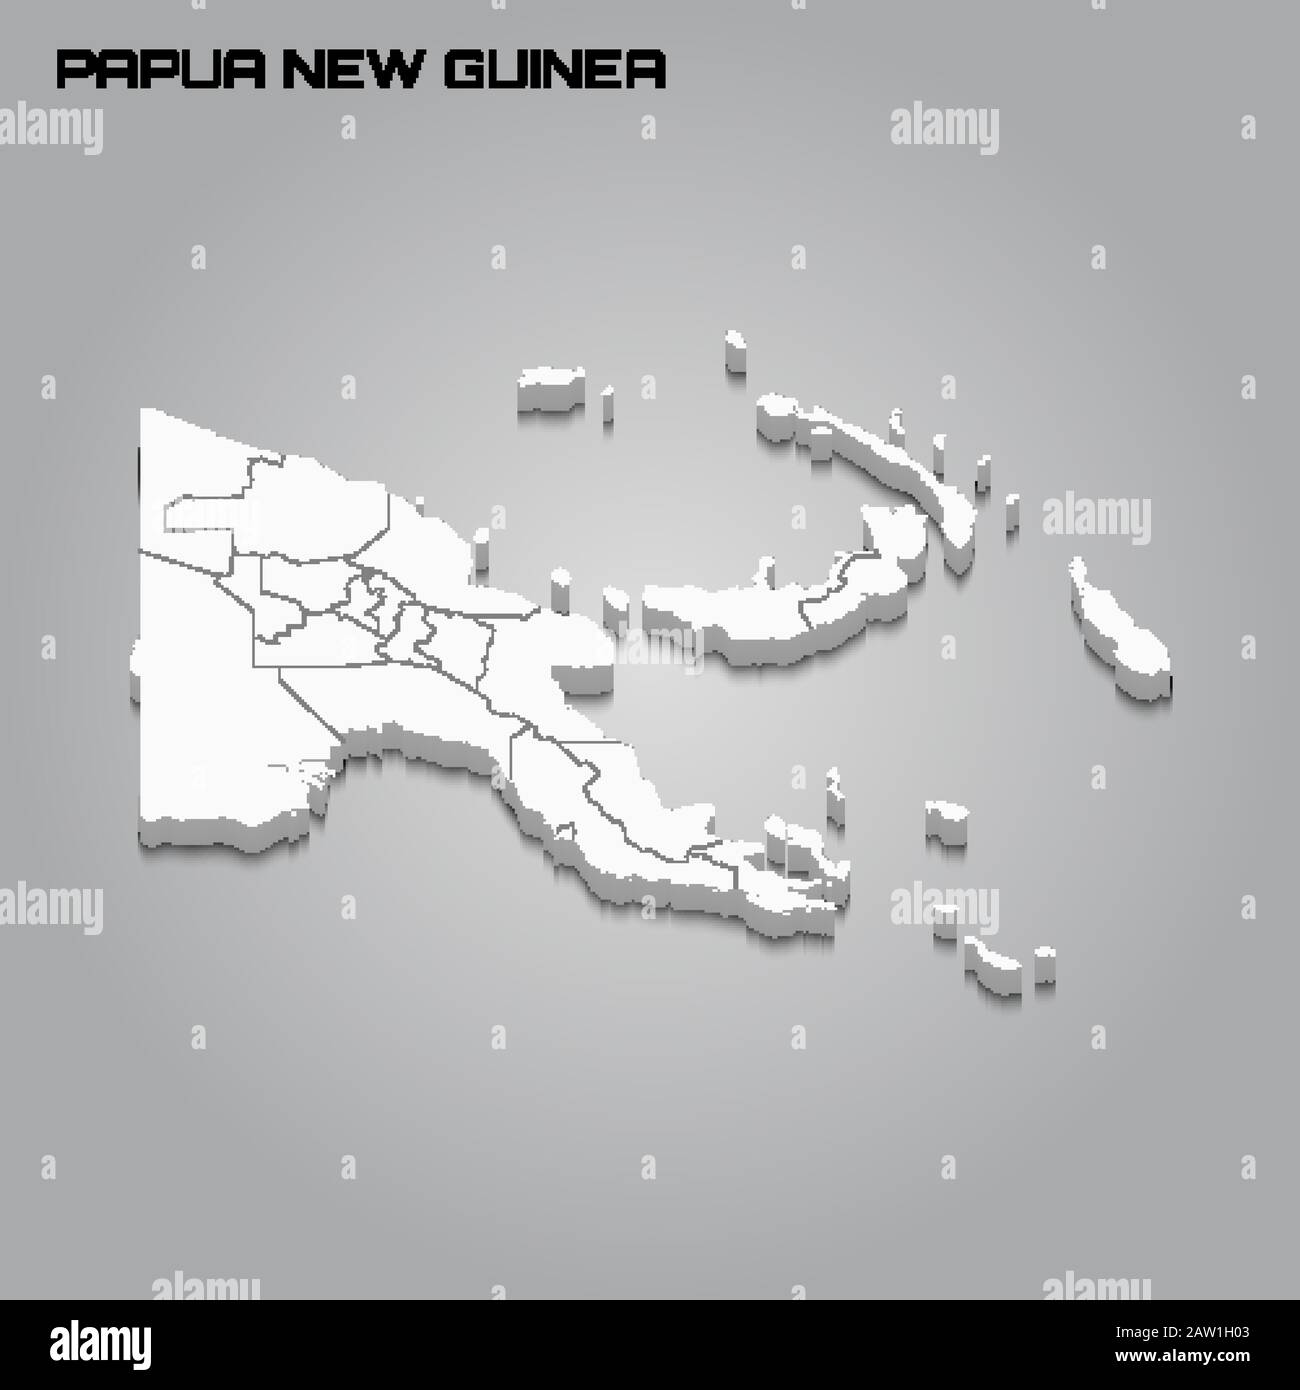 Papua New Guinea 3d map with borders of regions. Vector illustration Stock Vector